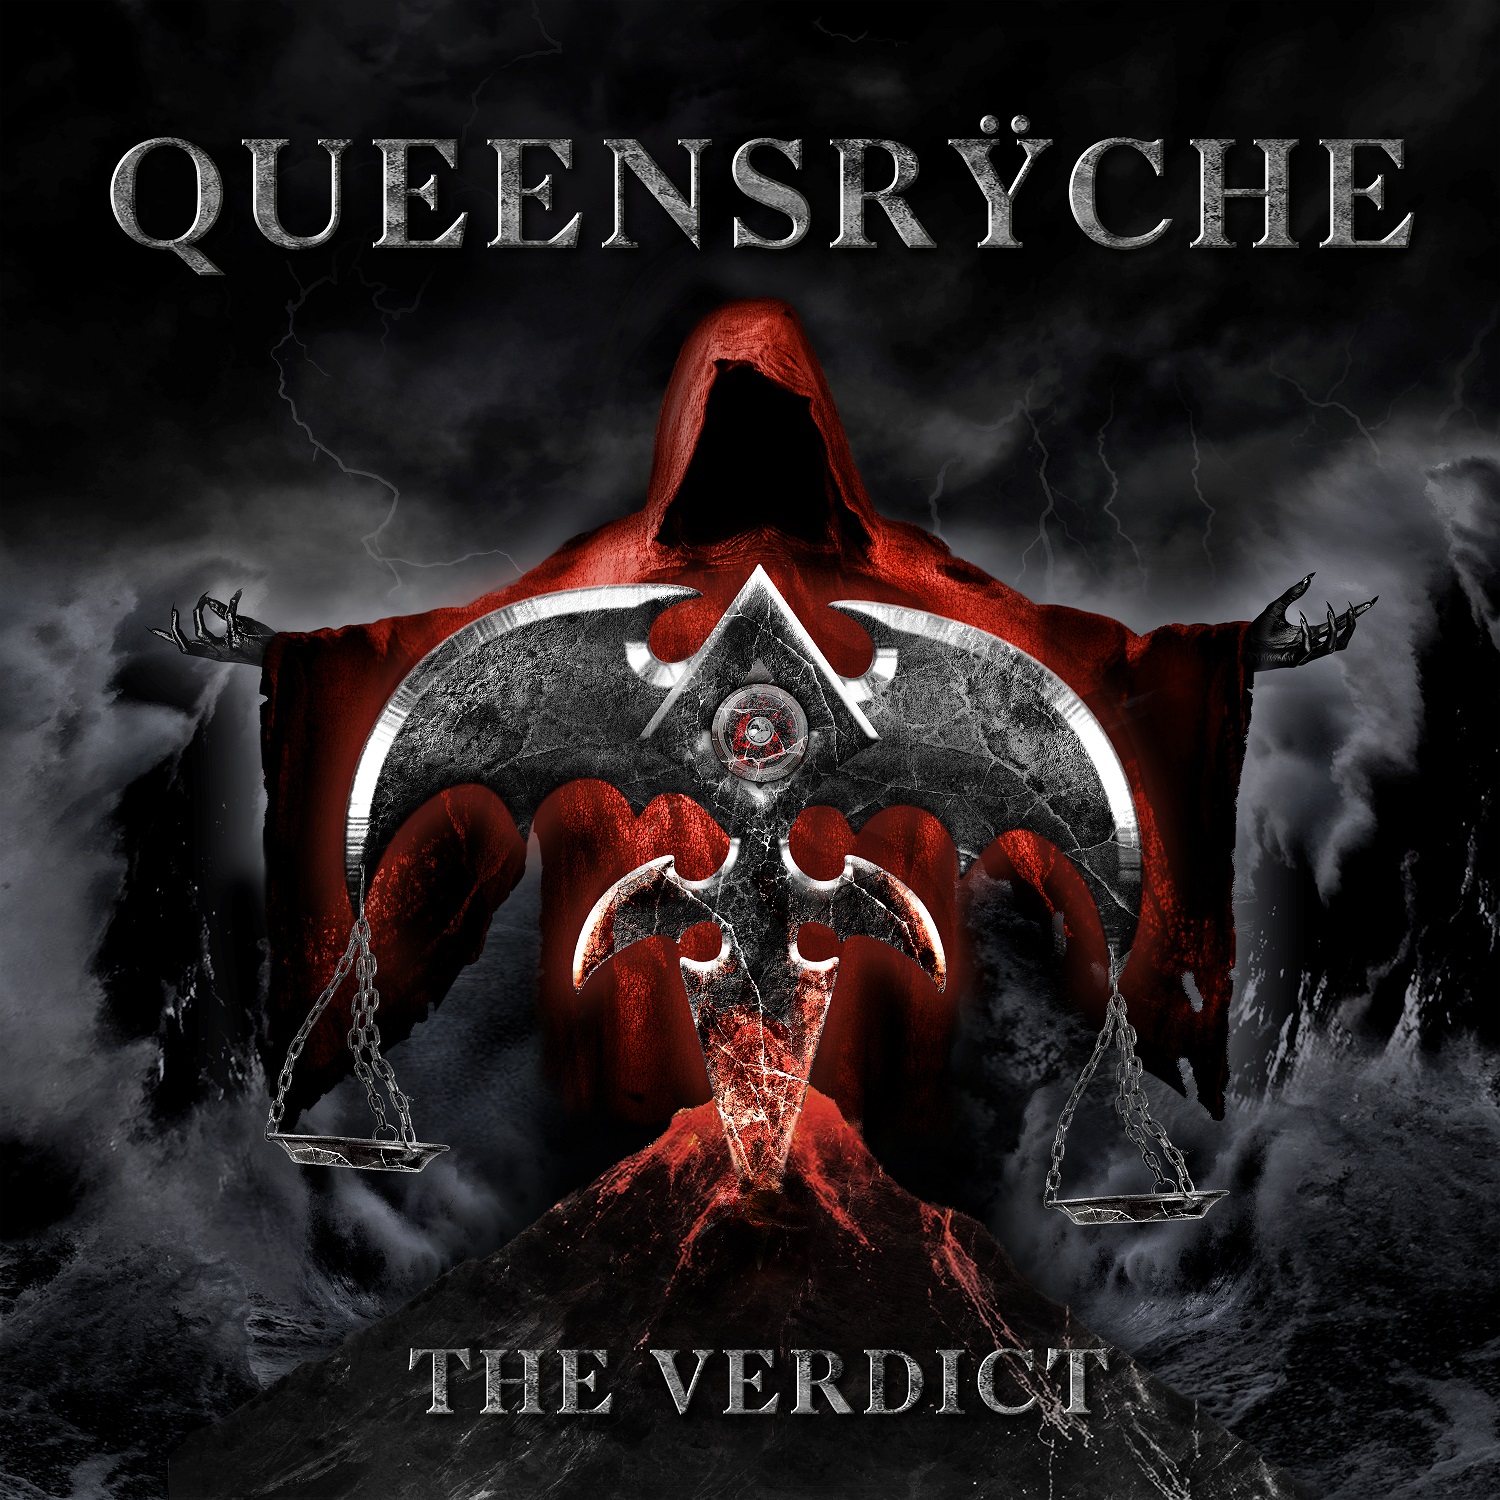 Queensryche Returns With The Verdict, Their New Record!